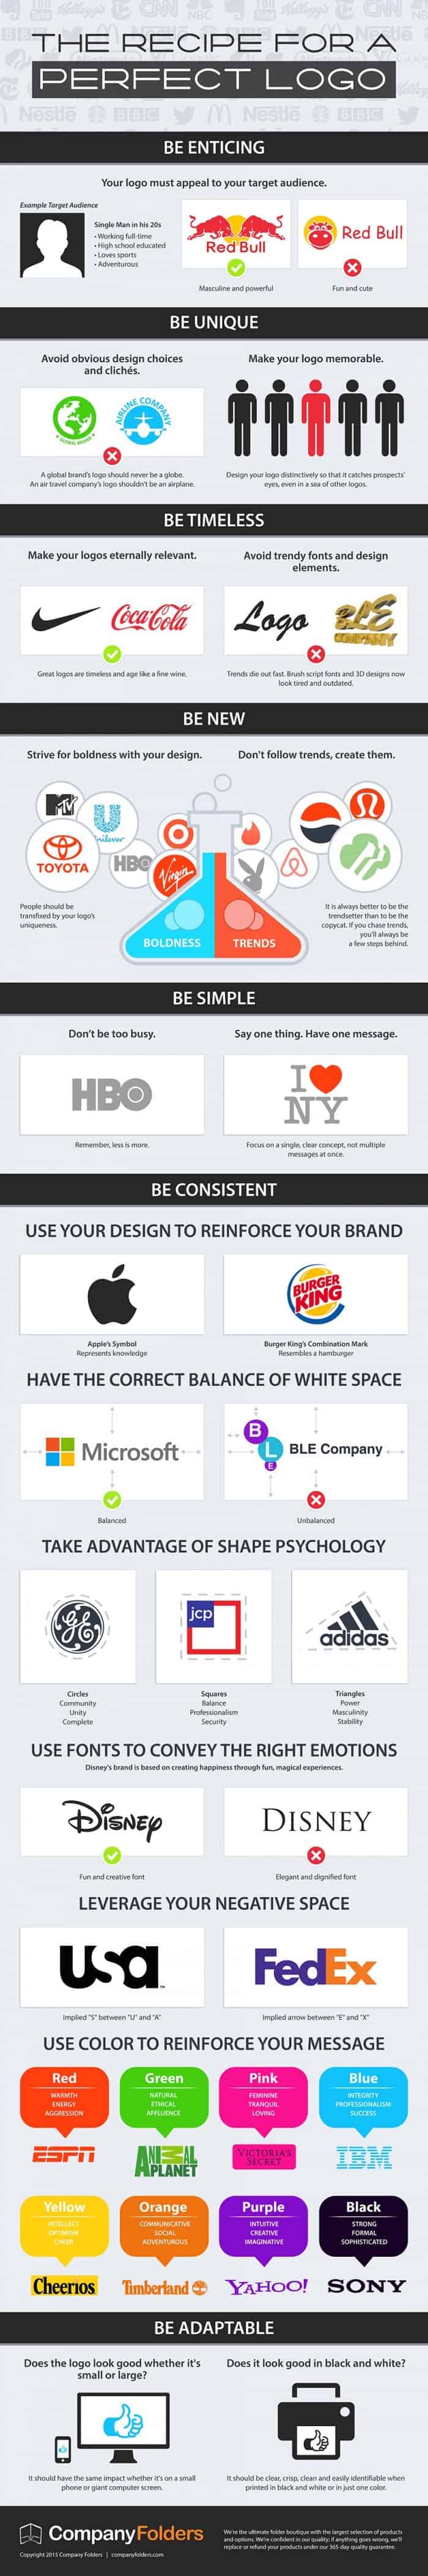 The Recipe For The Perfect Logo [Infographic] | Daily Infographic